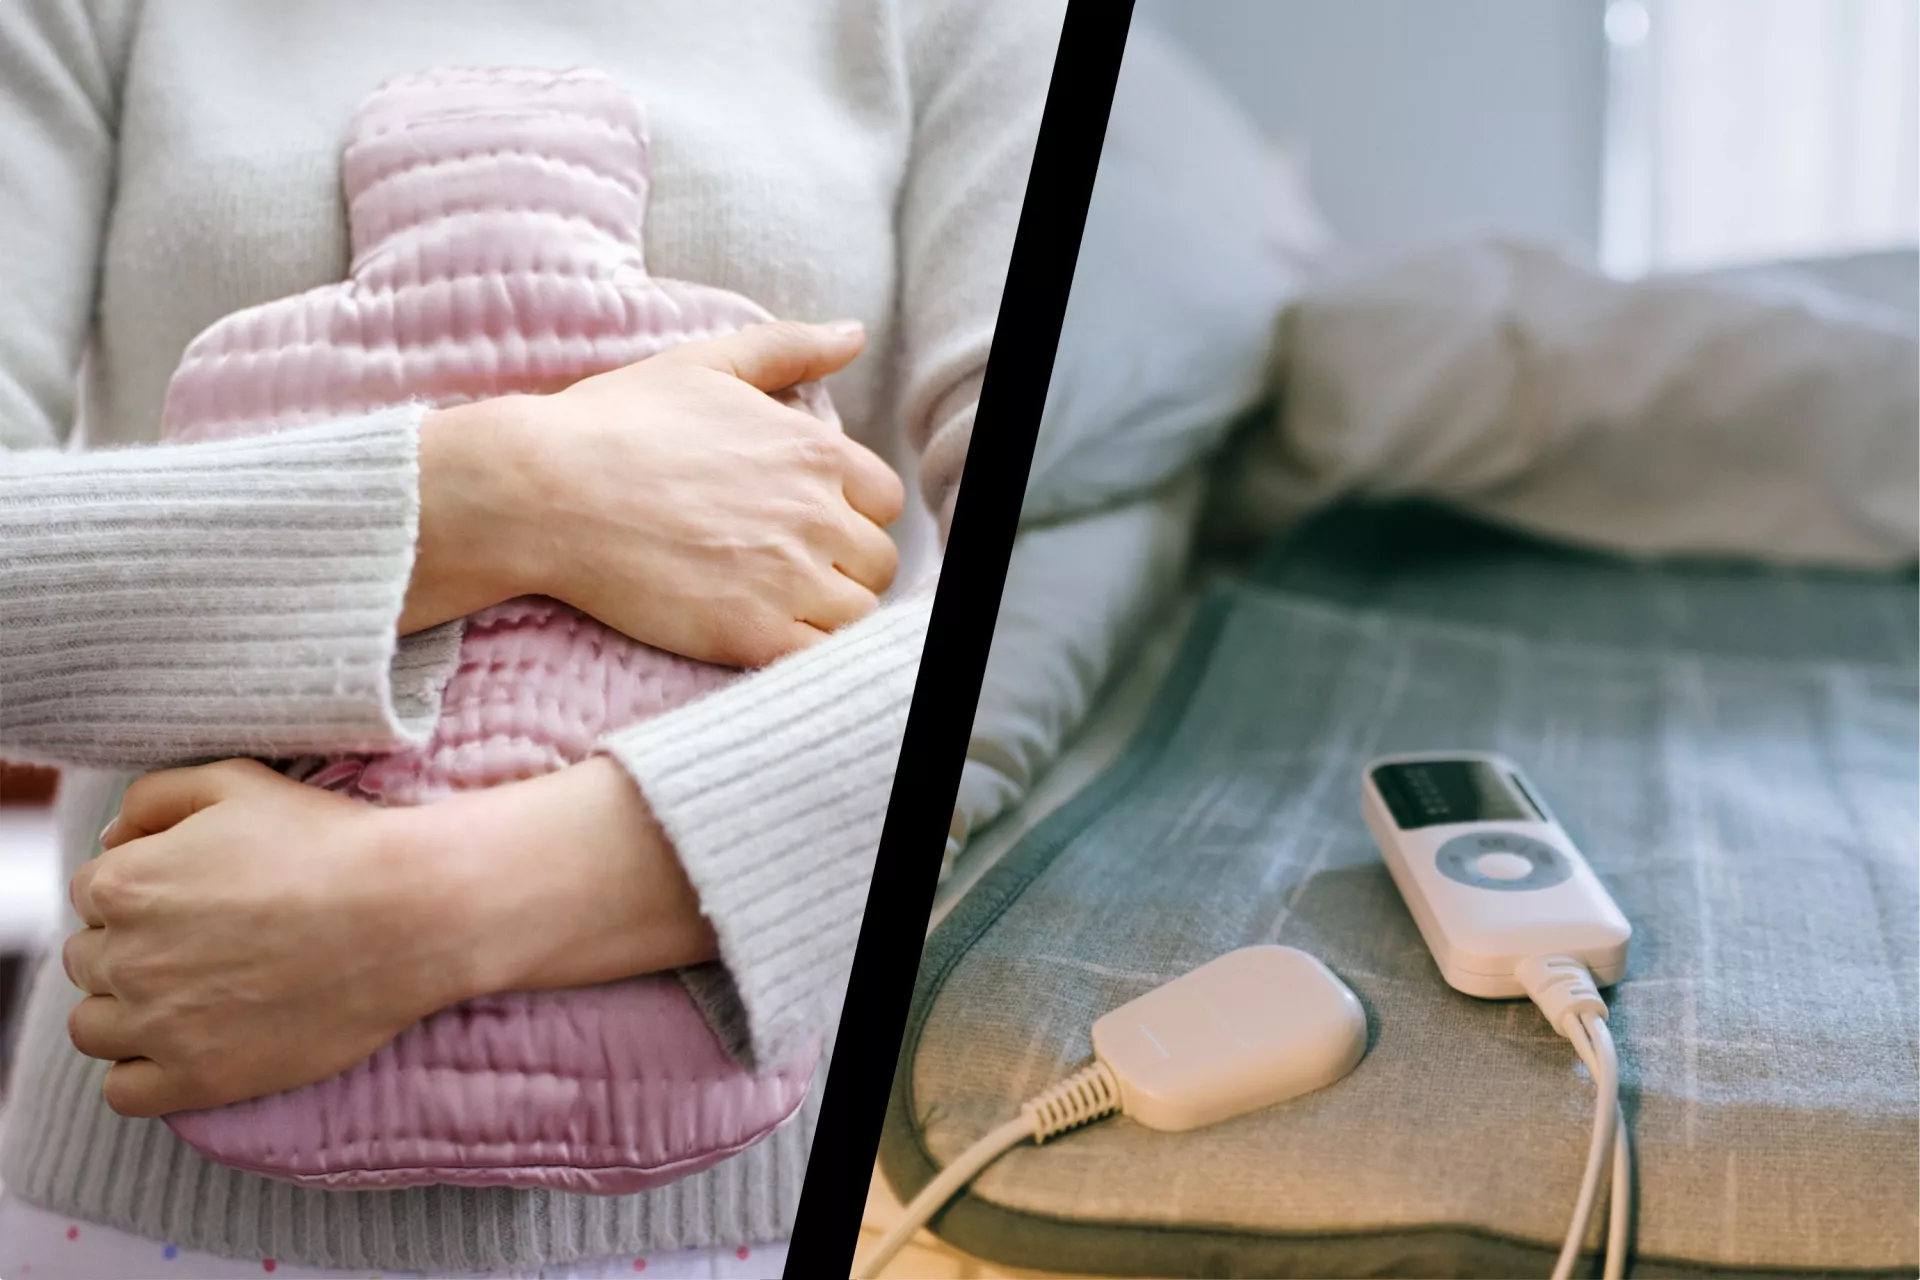 Hot water bottle vs electric blanket – which is cheaper to keep warm?